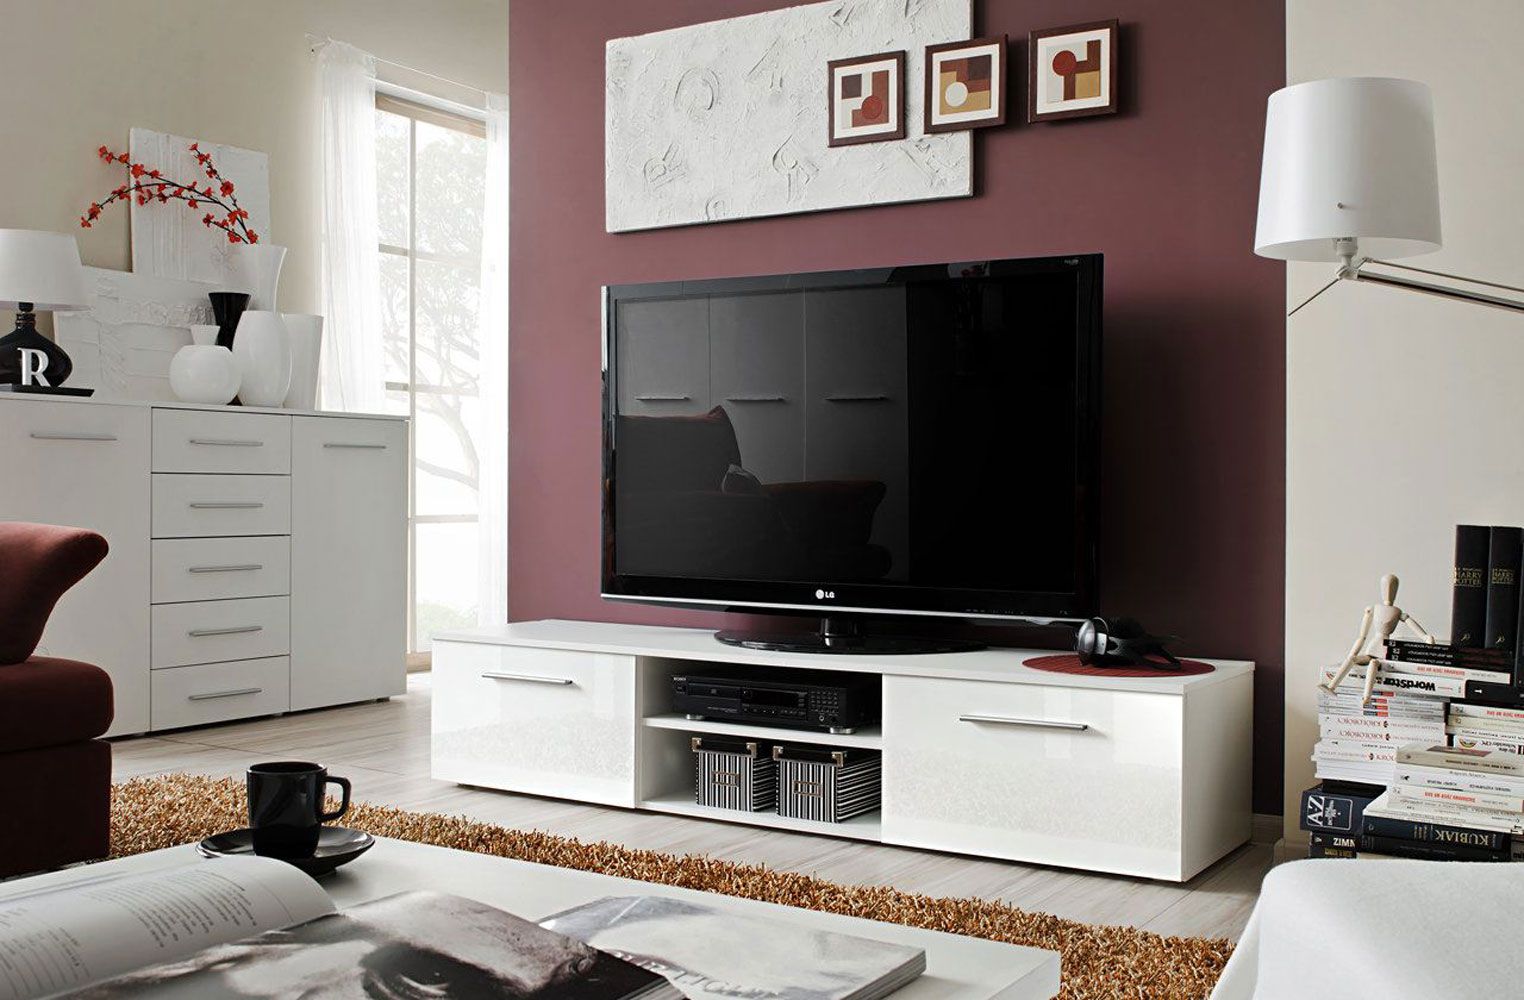 TV lowboard with two doors Salmeli 22, color: black / white - Dimensions: 35 x 180 x 45 cm (H x W x D)